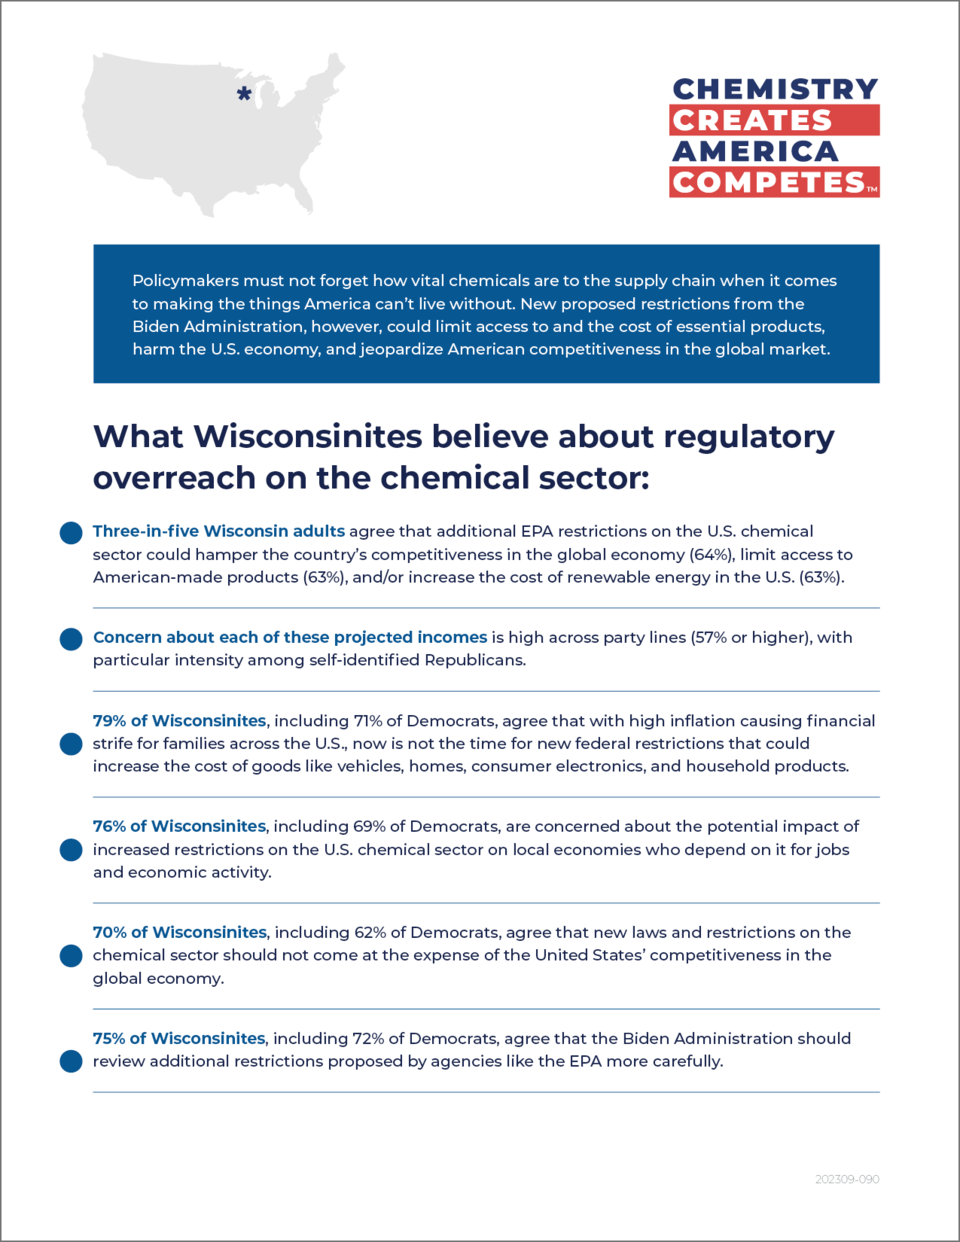 What Wisconsinites Believe About Regulatory Overreach on Chemical Sector - Fact Sheet